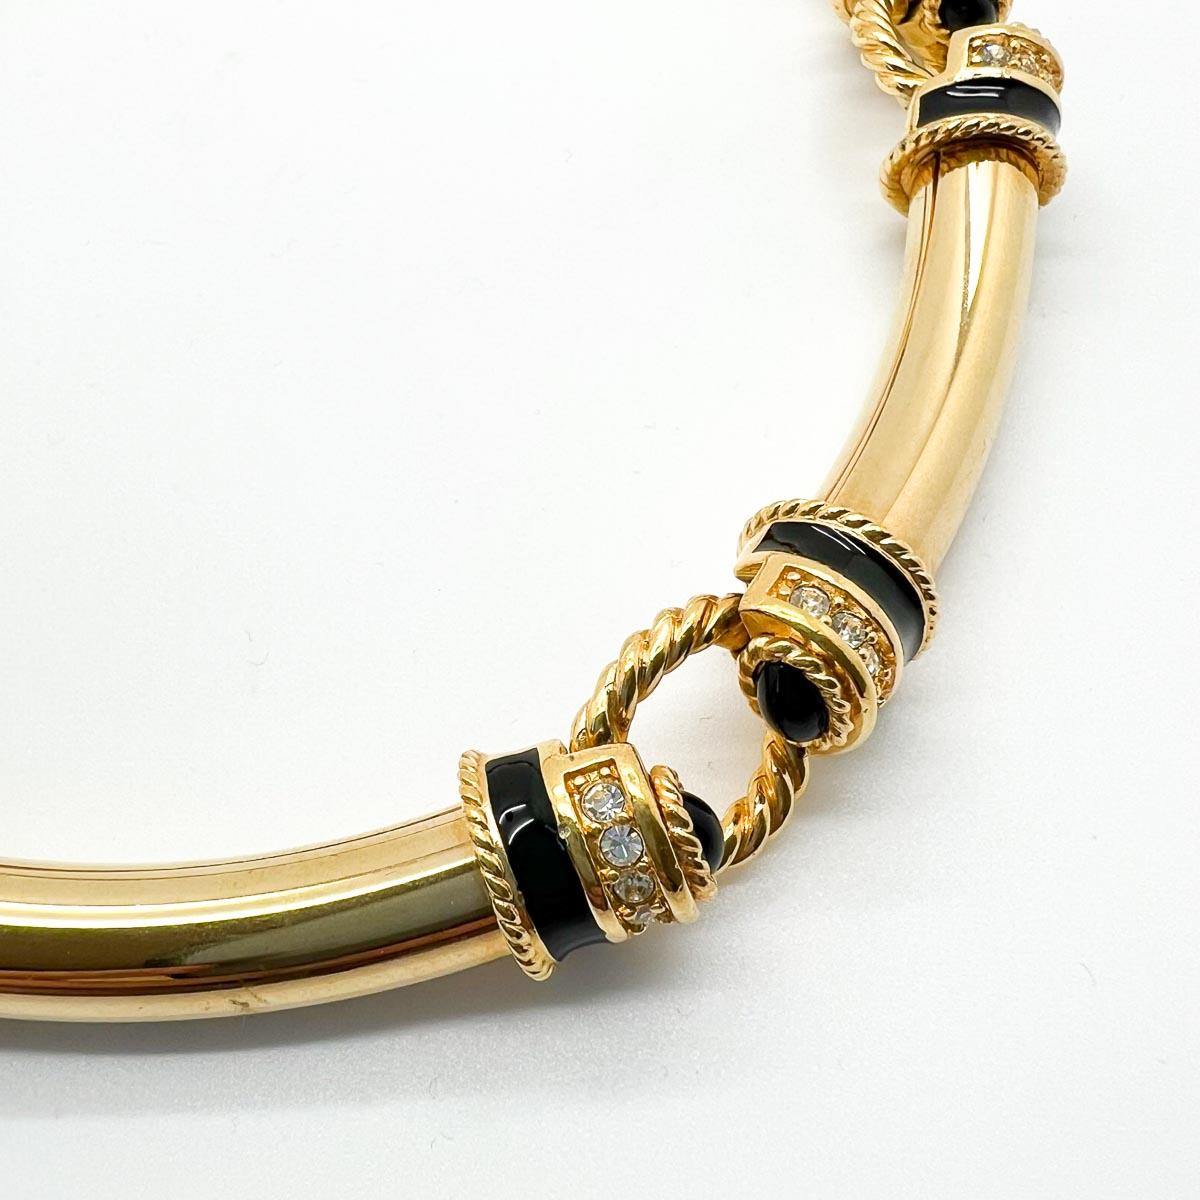 A Vintage Gold Tubular Necklace. A perfect style classic. The lustrous gold bars creating a striking design and detail to die for with cabochon stone ends and pave set crystals to add the perfect finishing touch.
An unsigned beauty. A rare treasure.